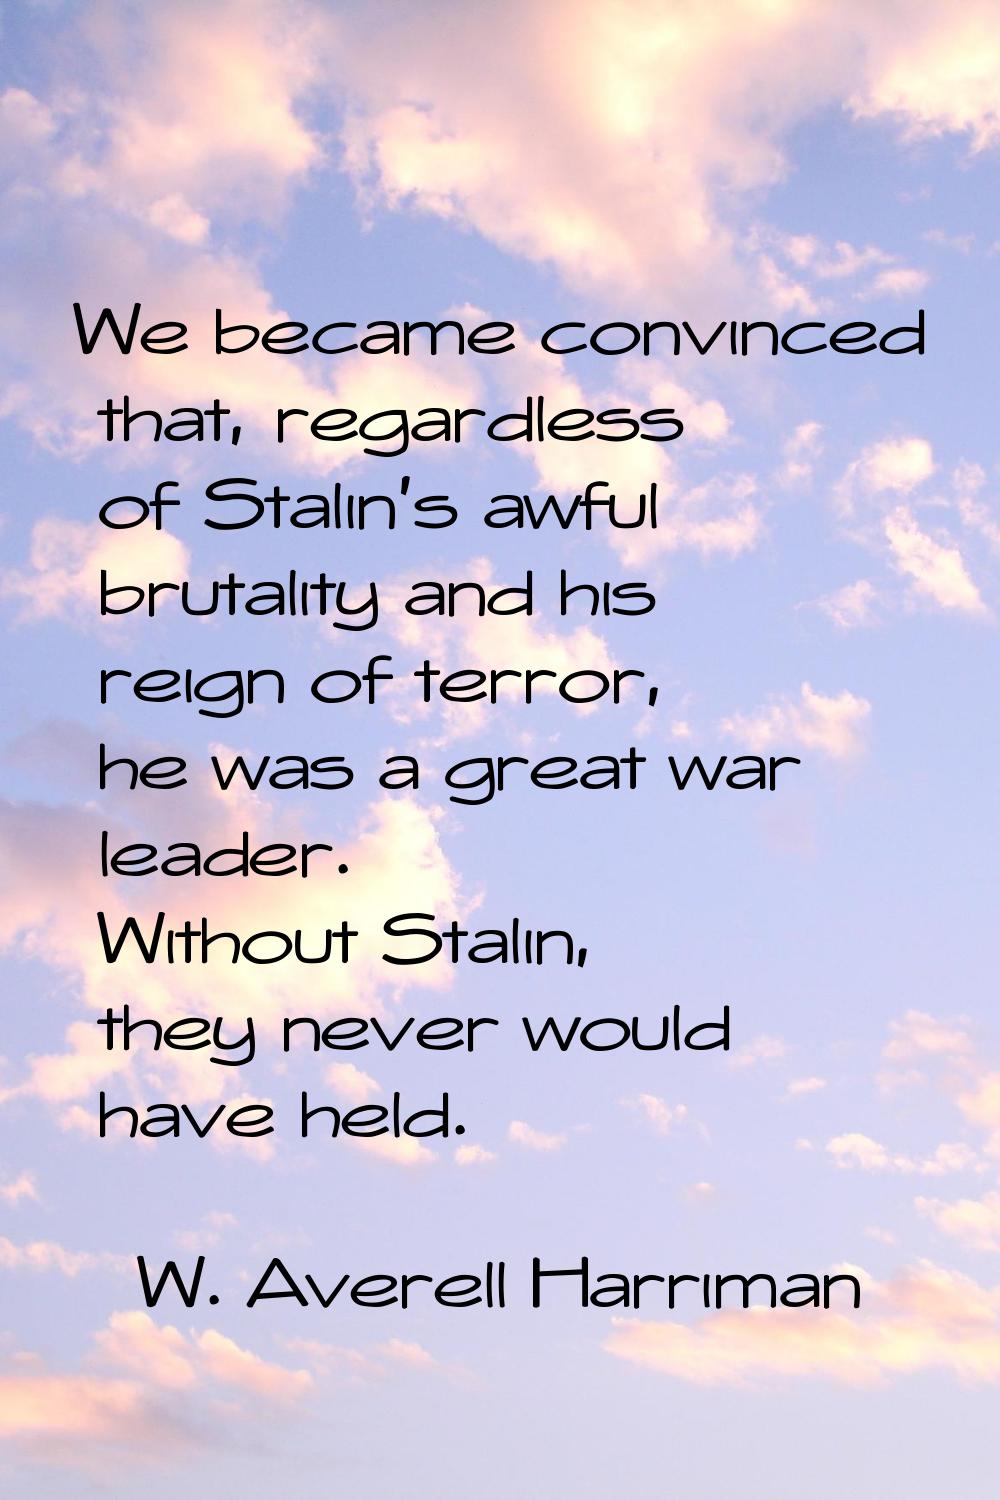 We became convinced that, regardless of Stalin's awful brutality and his reign of terror, he was a 